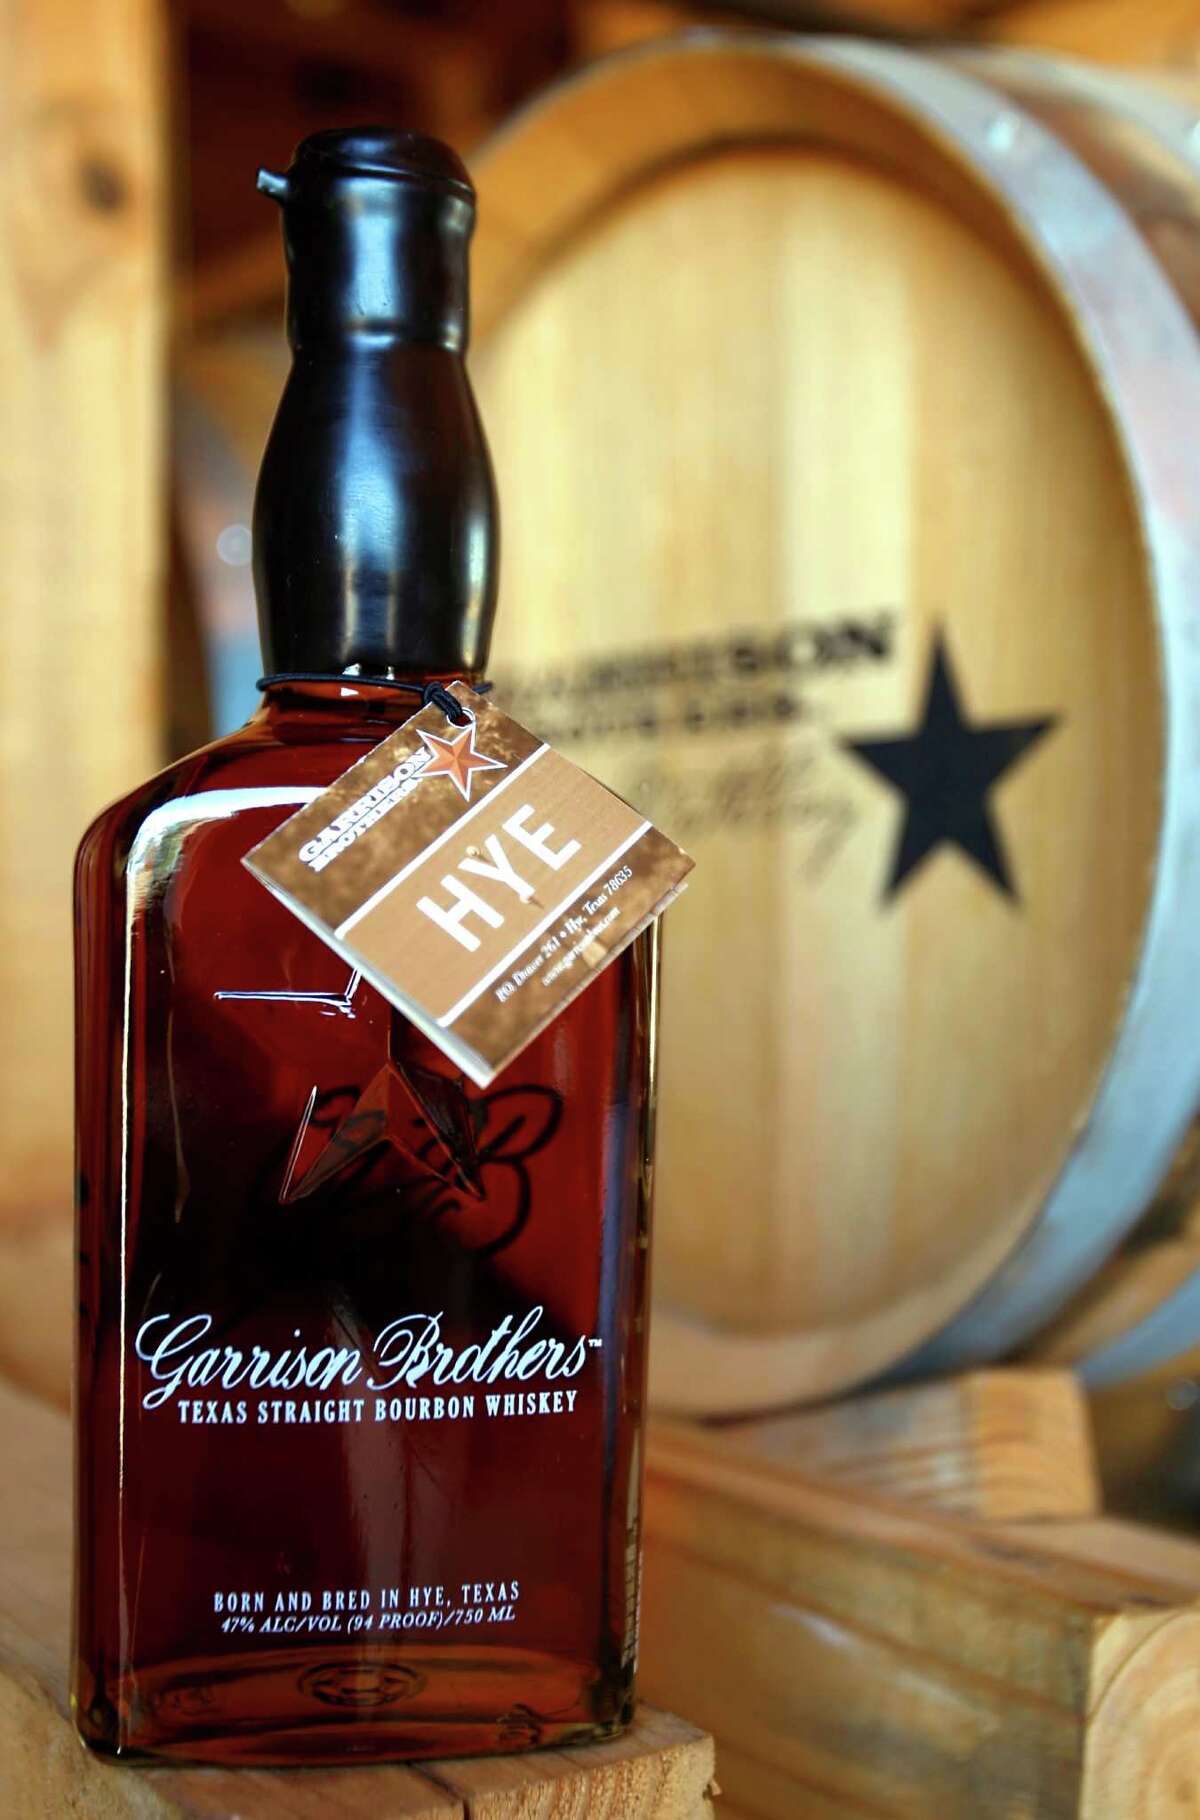 A bottle of Garrison Brothers bourbon